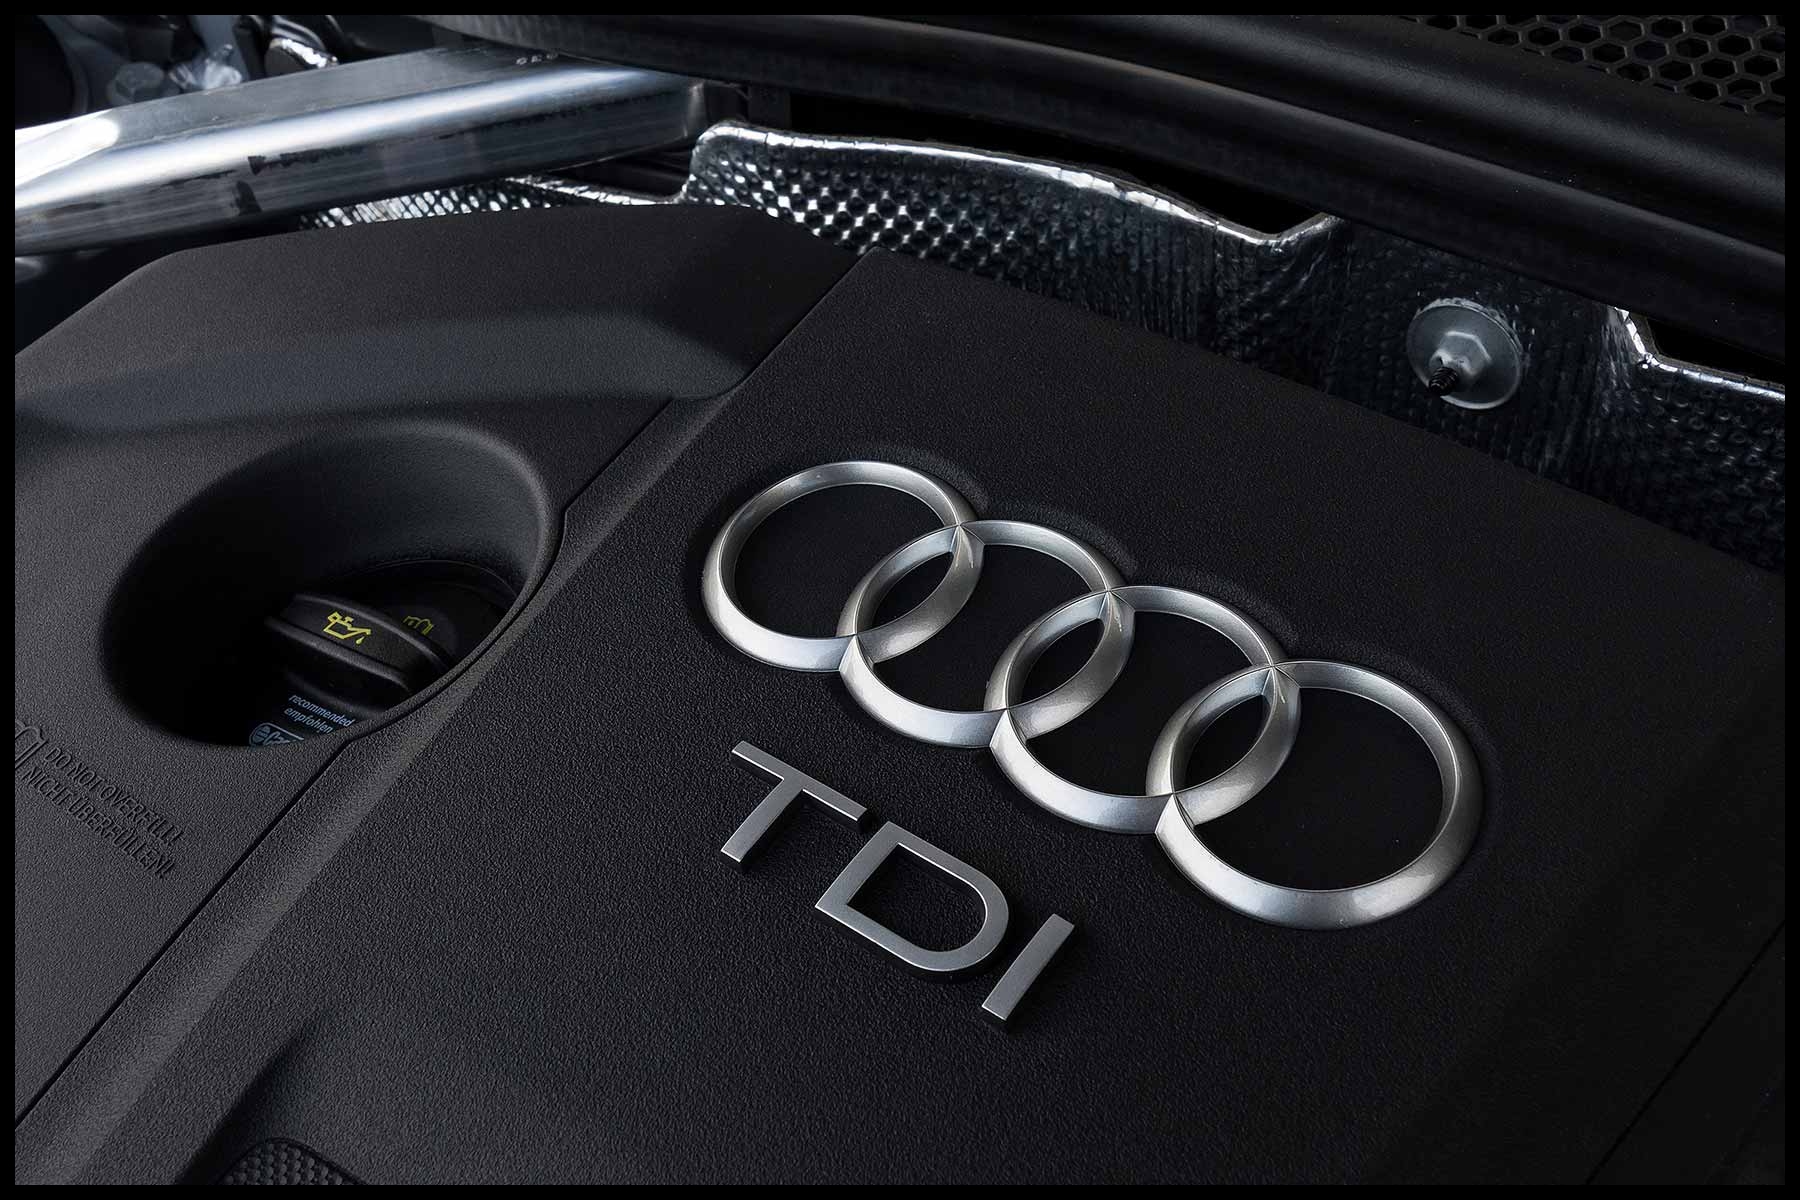 Audi has launched an online check your car page so owners can see whether their model is affected by the Volkswagen emissions scandal